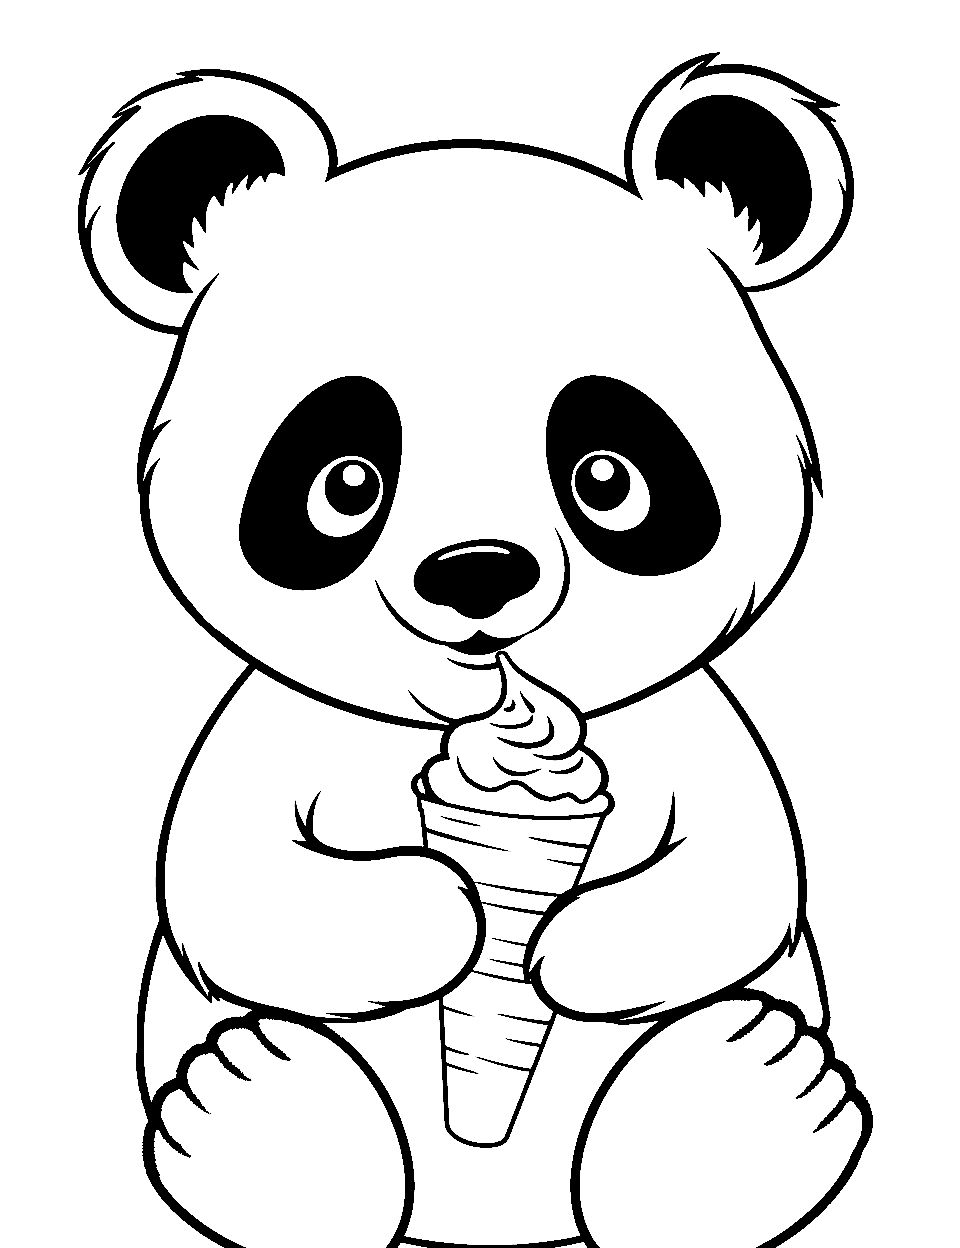 Summer Panda with Ice Cream Coloring Page - A panda enjoying an ice cream cone on a warm day.